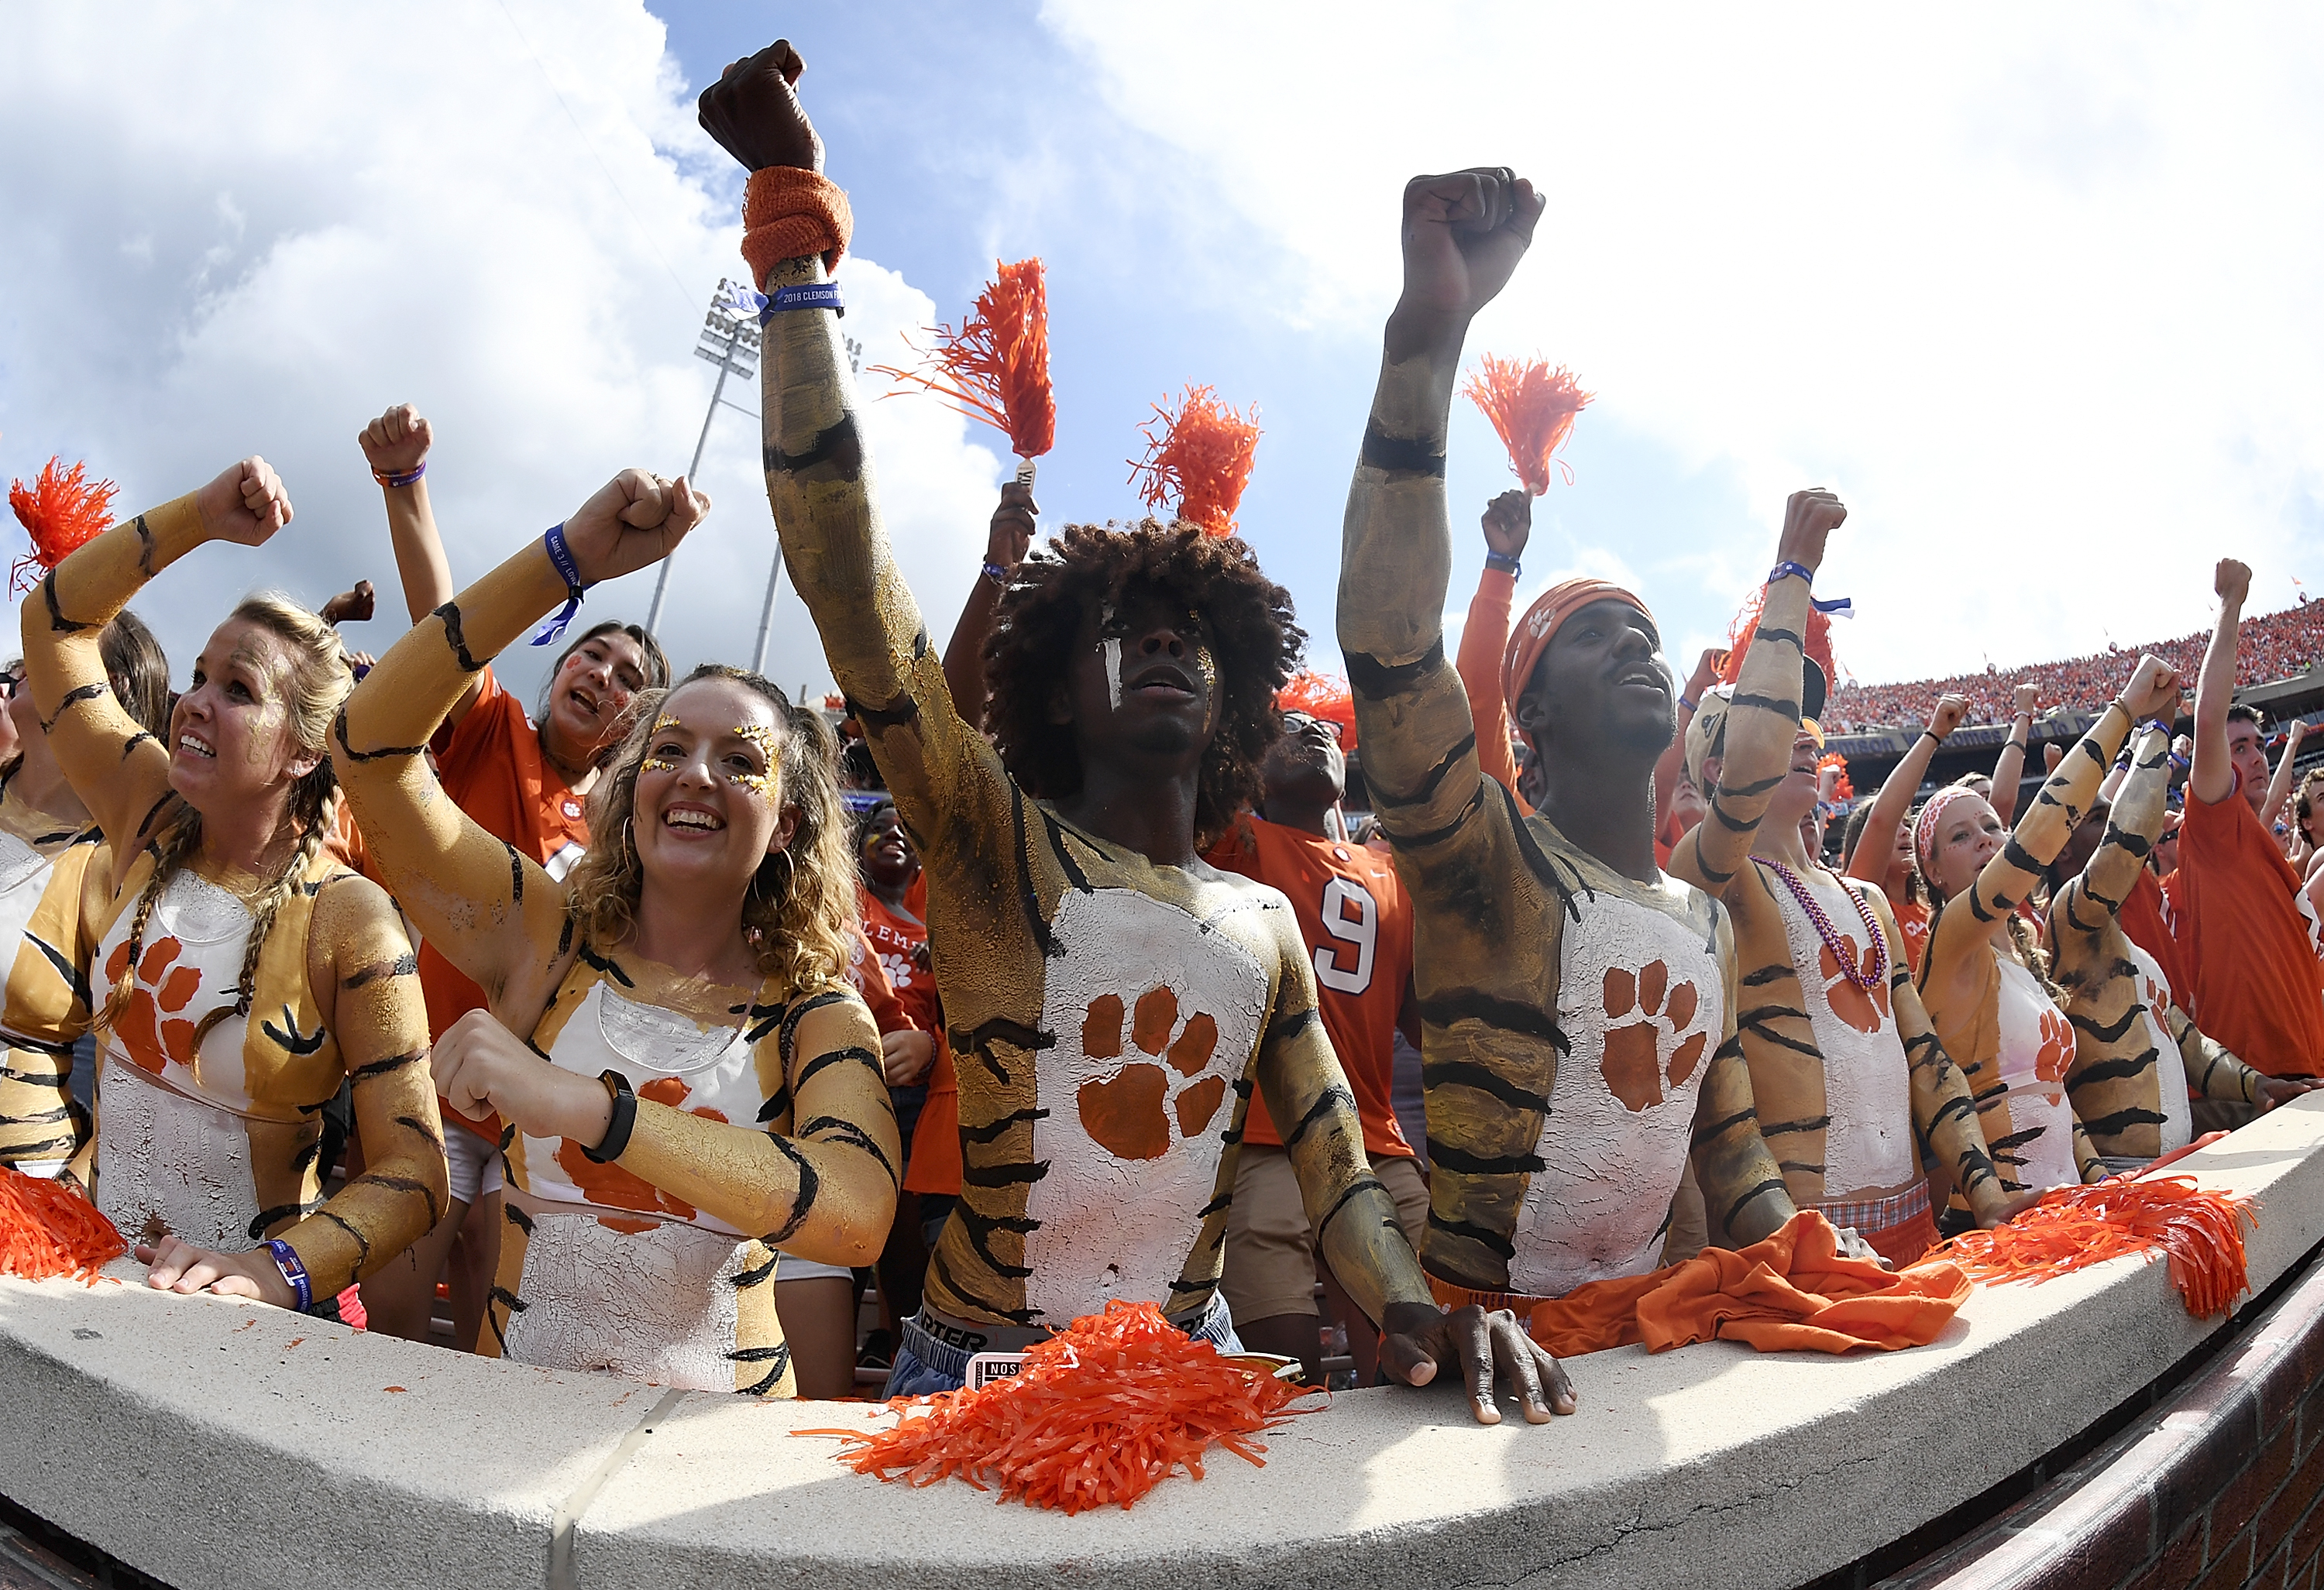 Dancefloor Collapses At Clemson Party: 30 People Injured In Frightening Video